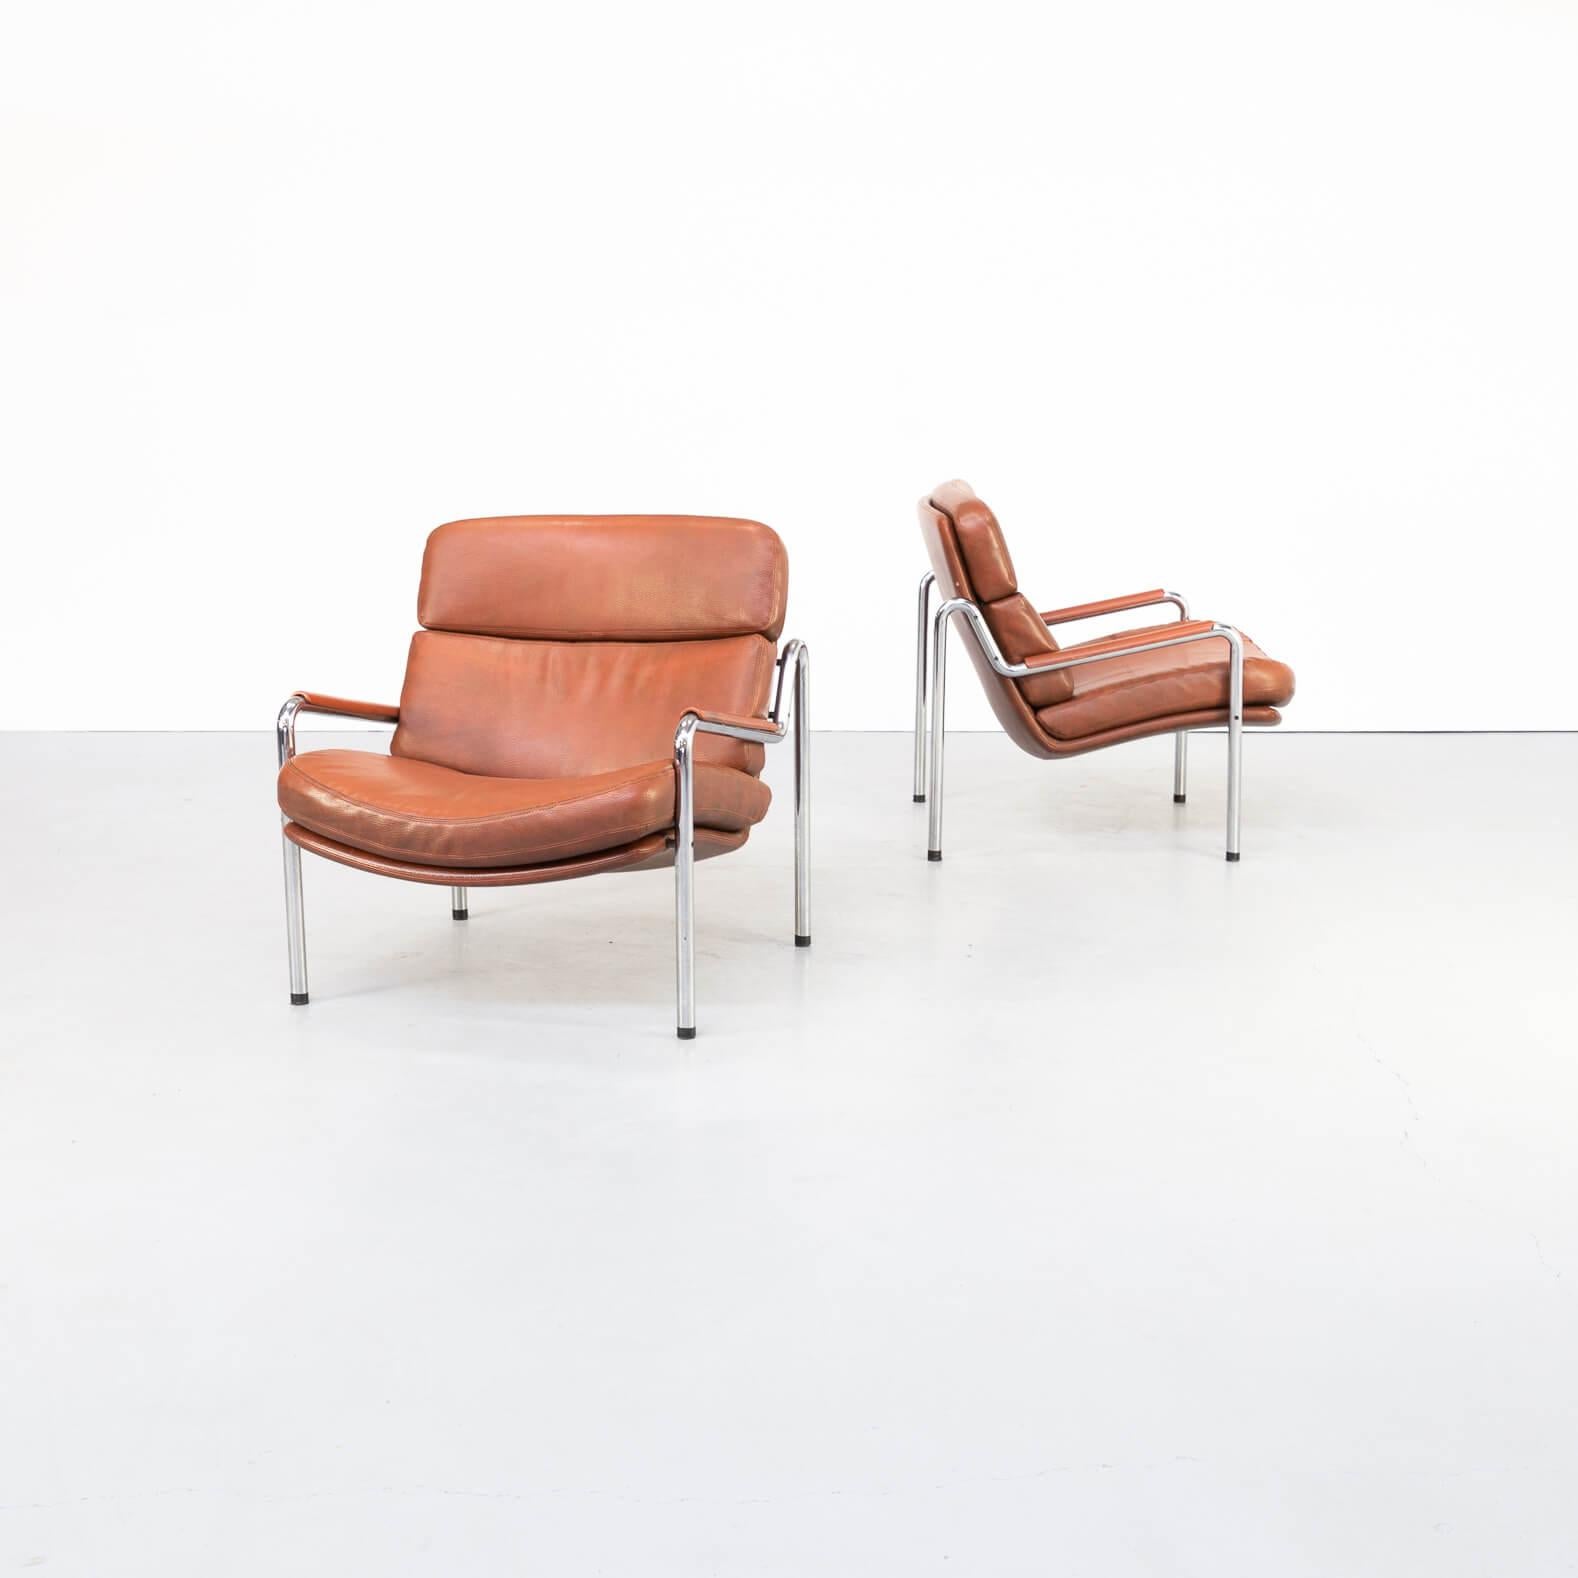 Comfortable pair of lounge chairs designed by Jorgen Kastholm for Kusch & Co, Germany, 1970. These chairs are made of brushed tubular steel frame and have high quality brown leather seats and arm rests. The chairs are in fine condition with